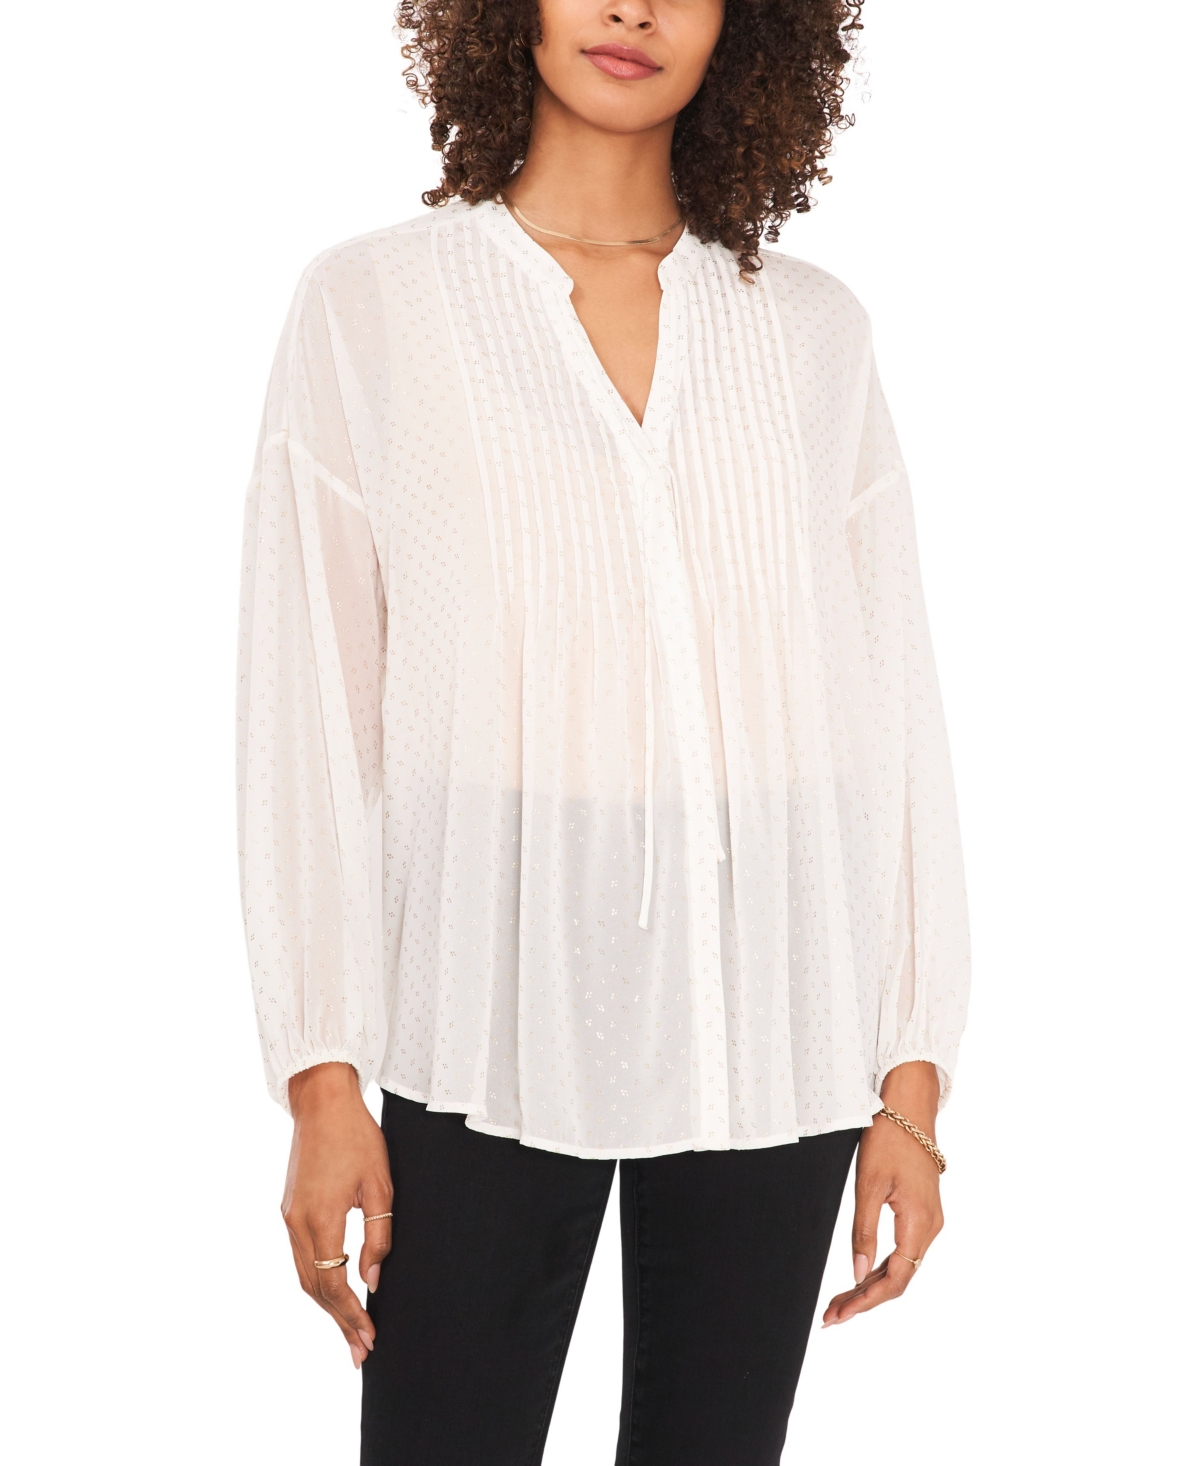 Women's Drop Shoulder Blouse with Pin tucks - New Ivory